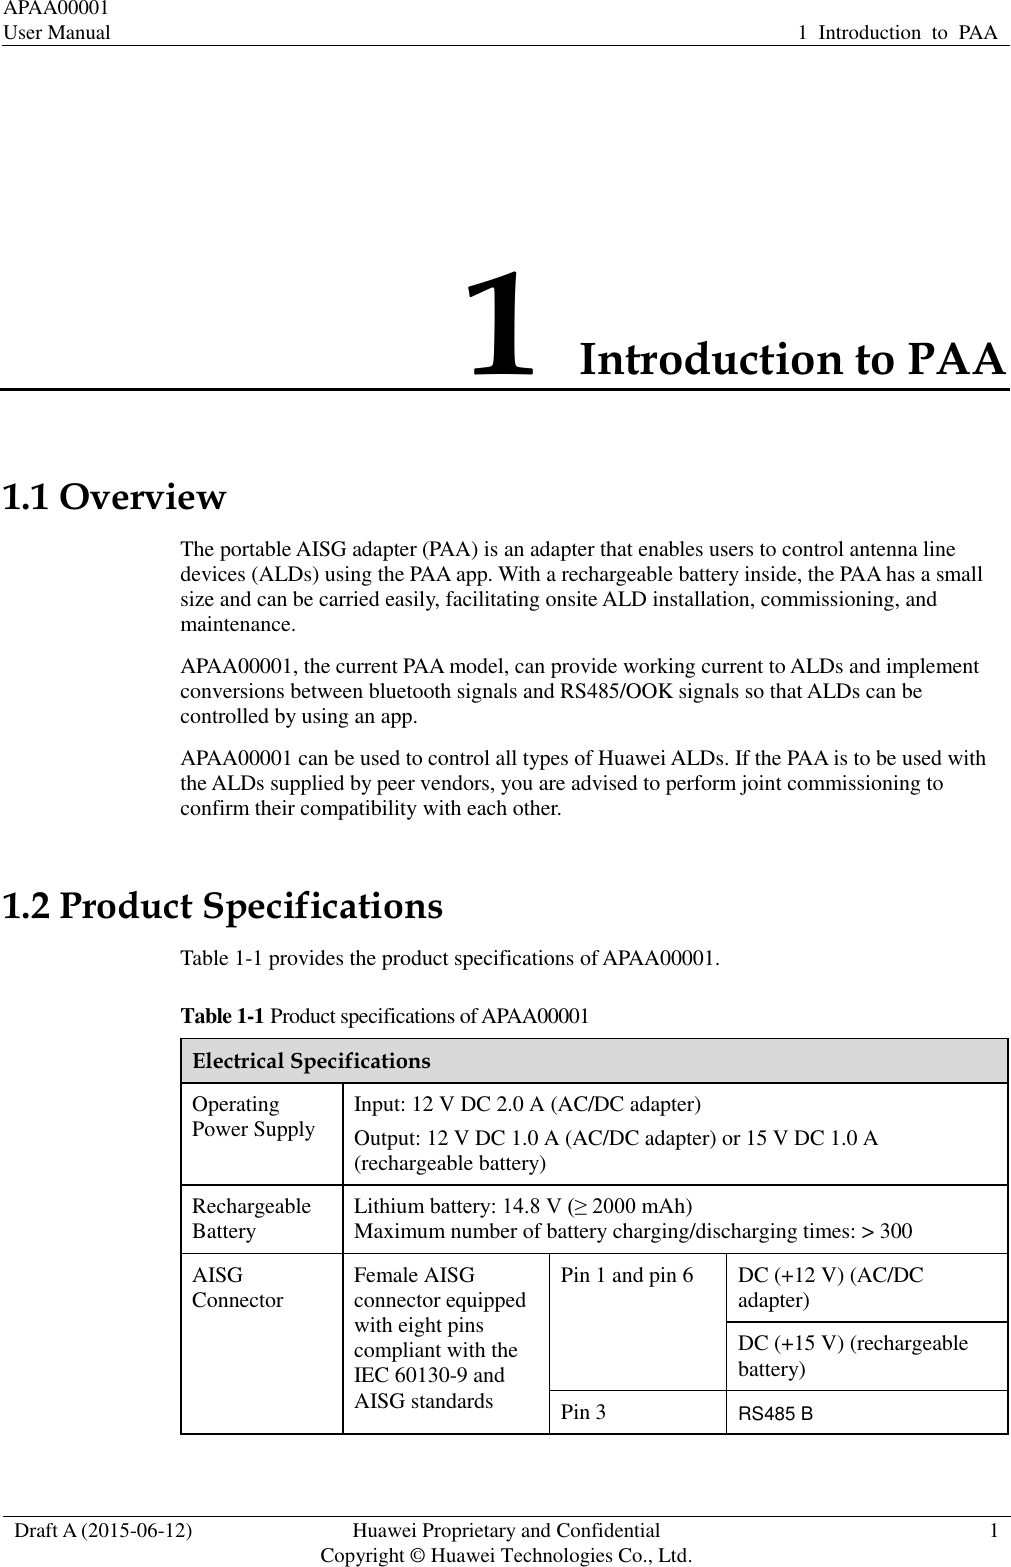 APAA00001 User Manual 1  Introduction  to  PAA  Draft A (2015-06-12) Huawei Proprietary and Confidential           Copyright © Huawei Technologies Co., Ltd. 1  1 Introduction to PAA 1.1 Overview The portable AISG adapter (PAA) is an adapter that enables users to control antenna line devices (ALDs) using the PAA app. With a rechargeable battery inside, the PAA has a small size and can be carried easily, facilitating onsite ALD installation, commissioning, and maintenance.   APAA00001, the current PAA model, can provide working current to ALDs and implement conversions between bluetooth signals and RS485/OOK signals so that ALDs can be controlled by using an app.   APAA00001 can be used to control all types of Huawei ALDs. If the PAA is to be used with the ALDs supplied by peer vendors, you are advised to perform joint commissioning to confirm their compatibility with each other. 1.2 Product Specifications Table 1-1 provides the product specifications of APAA00001.   Table 1-1 Product specifications of APAA00001 Electrical Specifications Operating Power Supply Input: 12 V DC 2.0 A (AC/DC adapter) Output: 12 V DC 1.0 A (AC/DC adapter) or 15 V DC 1.0 A (rechargeable battery) Rechargeable Battery Lithium battery: 14.8 V (≥ 2000 mAh) Maximum number of battery charging/discharging times: &gt; 300 AISG Connector Female AISG connector equipped with eight pins compliant with the IEC 60130-9 and AISG standards Pin 1 and pin 6 DC (+12 V) (AC/DC adapter) DC (+15 V) (rechargeable battery) Pin 3 RS485 B 